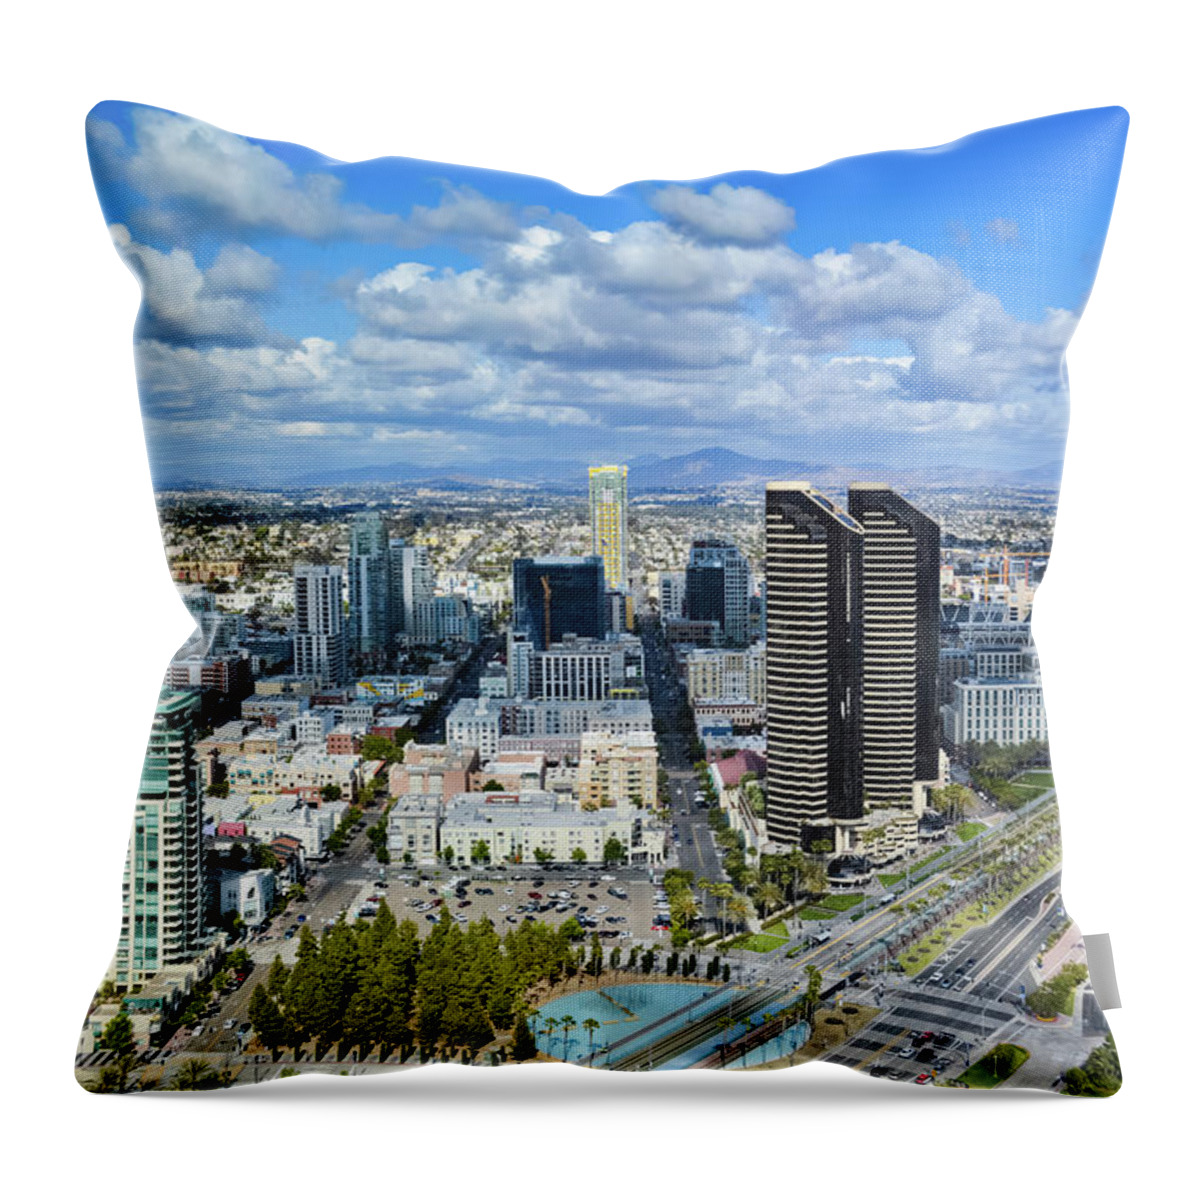 California Throw Pillow featuring the photograph Downtown San Diego by Kyle Hanson